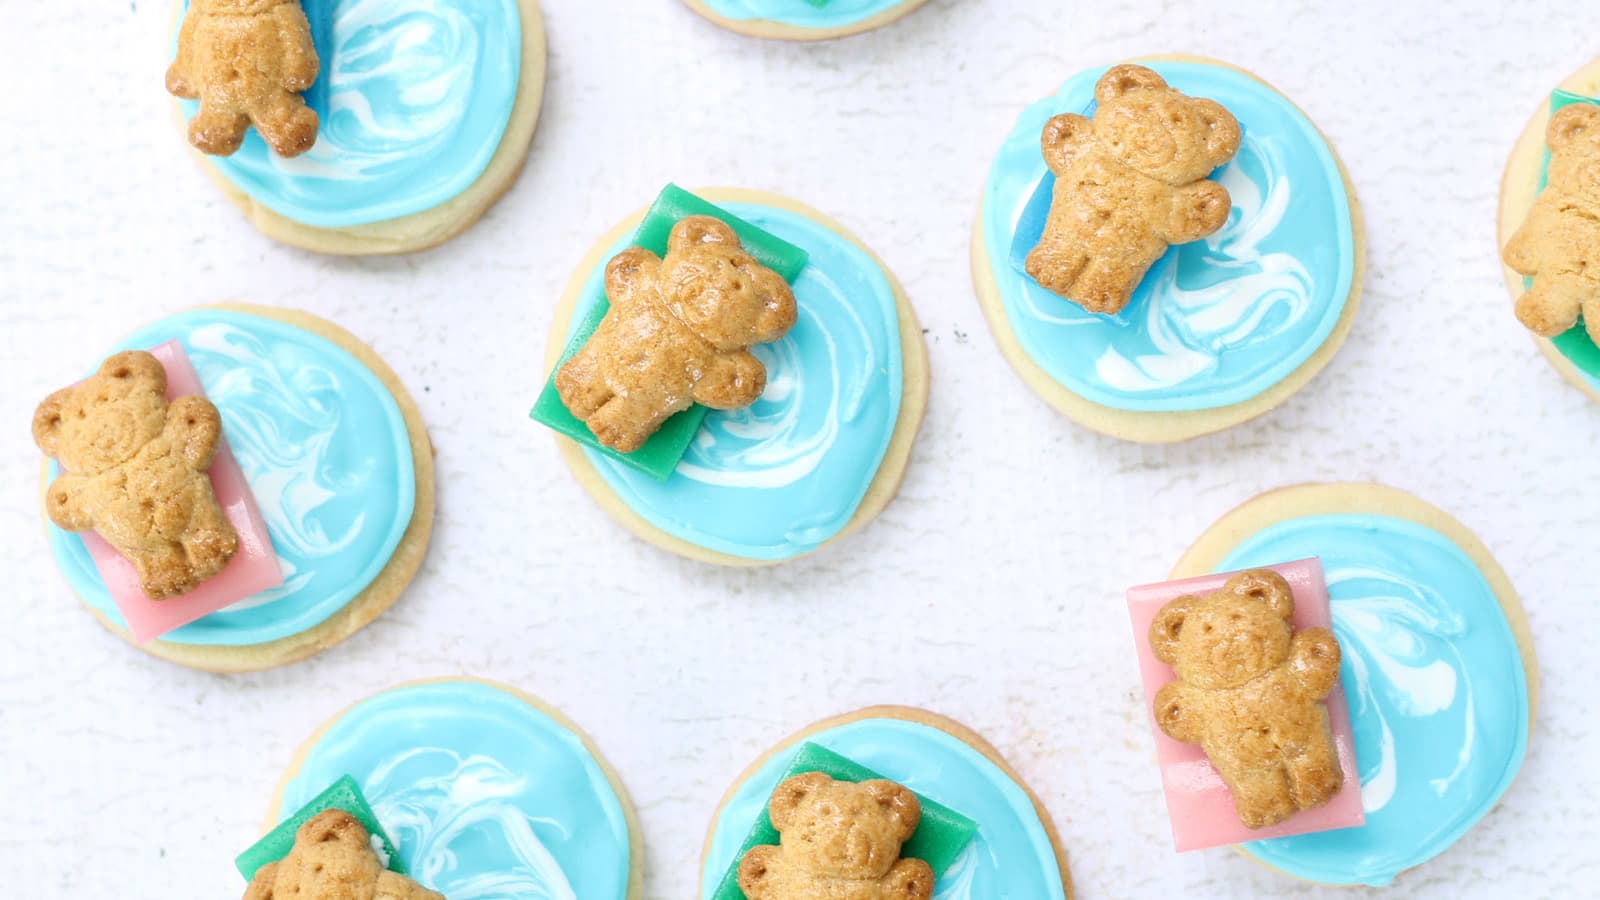 Pool party cookies: Swimming Teddy Grahams, a fun summer